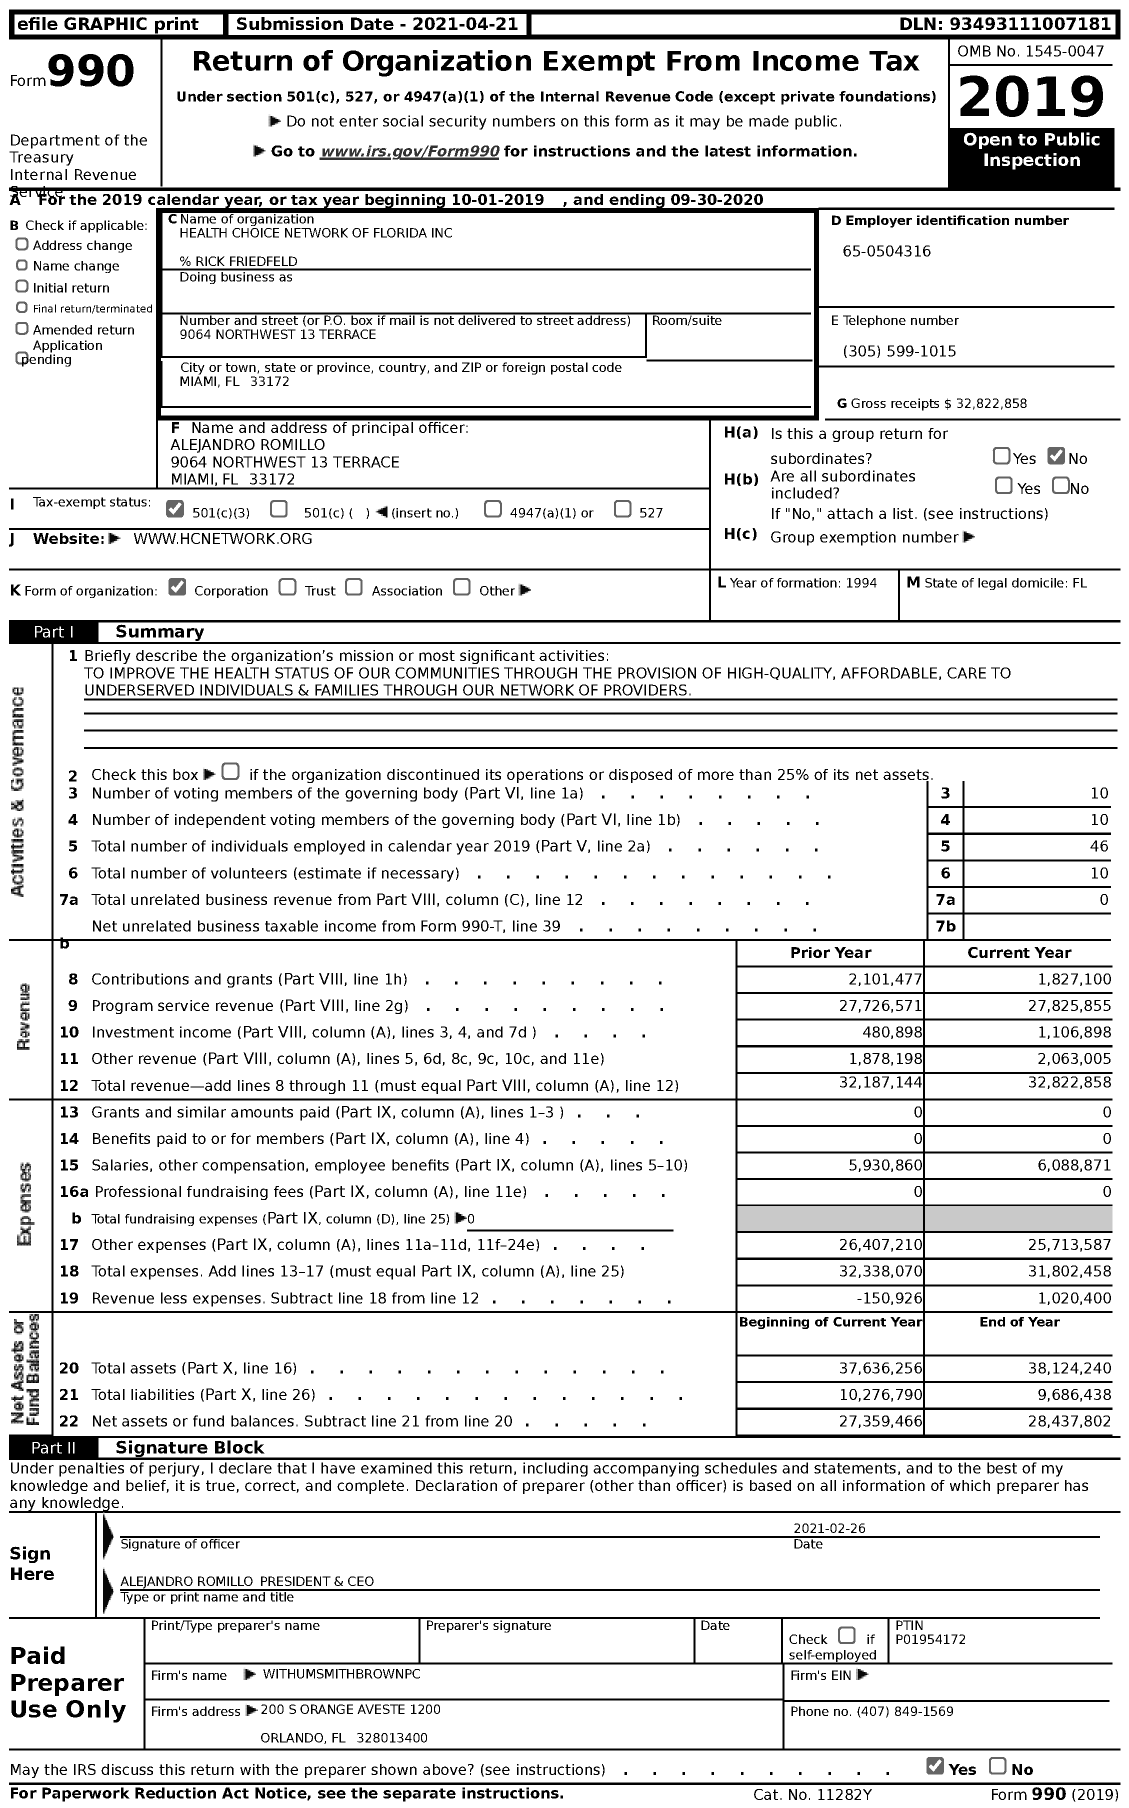 Image of first page of 2019 Form 990 for Health Choice Network of Florida (HCN)